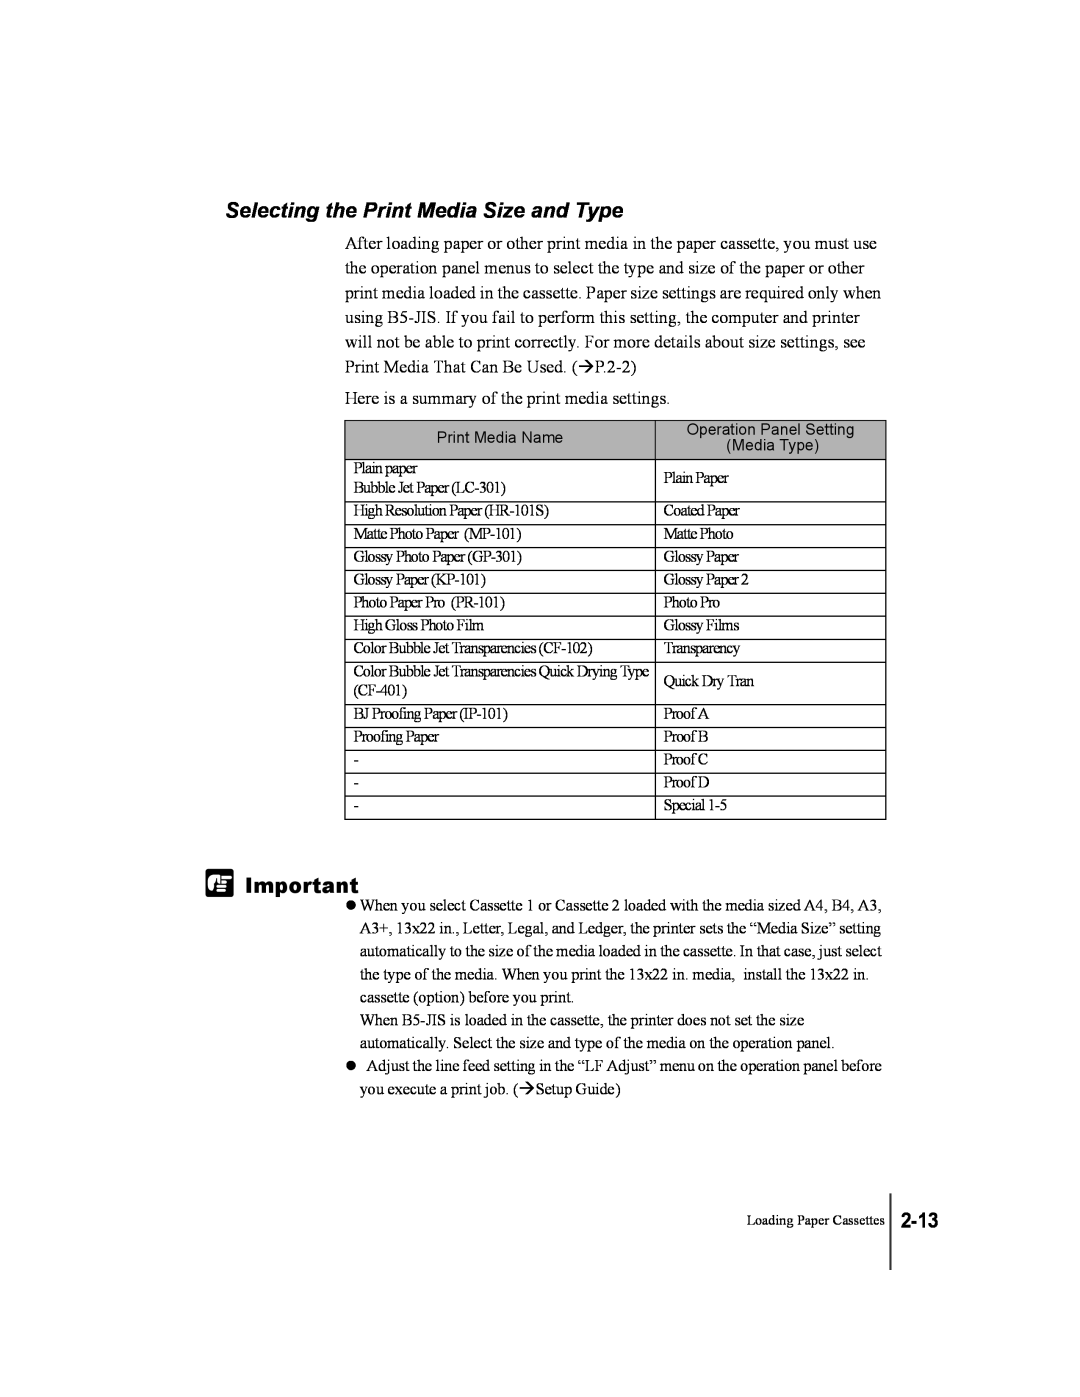 Canon W2200 manual Selecting the Print Media Size and Type, 2-13, Here is a summary of the print media settings 